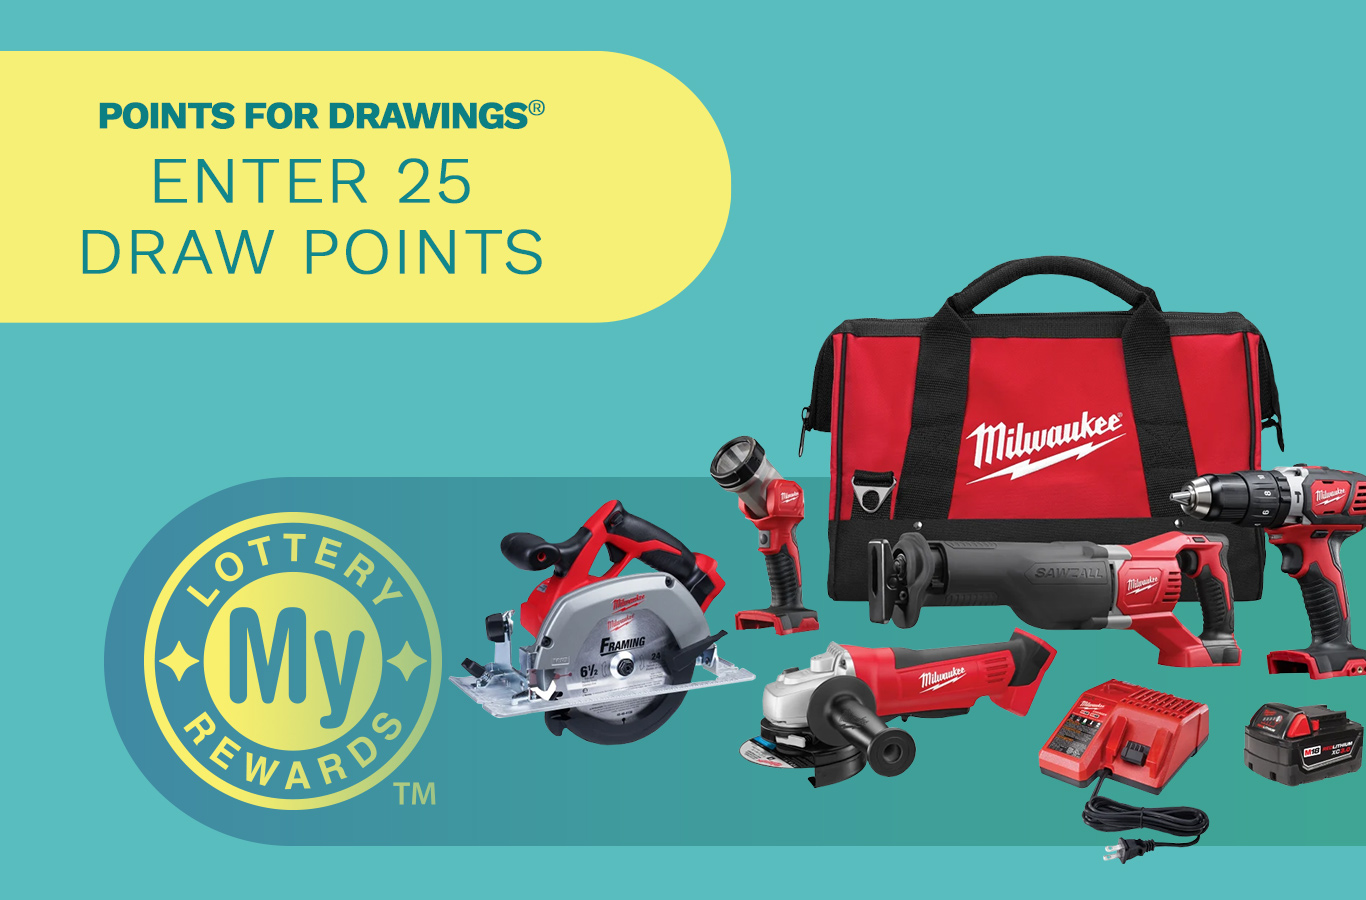 Here's your chance to win a Milwaukee® Tool Kit! Enter by Monday, April 1st.